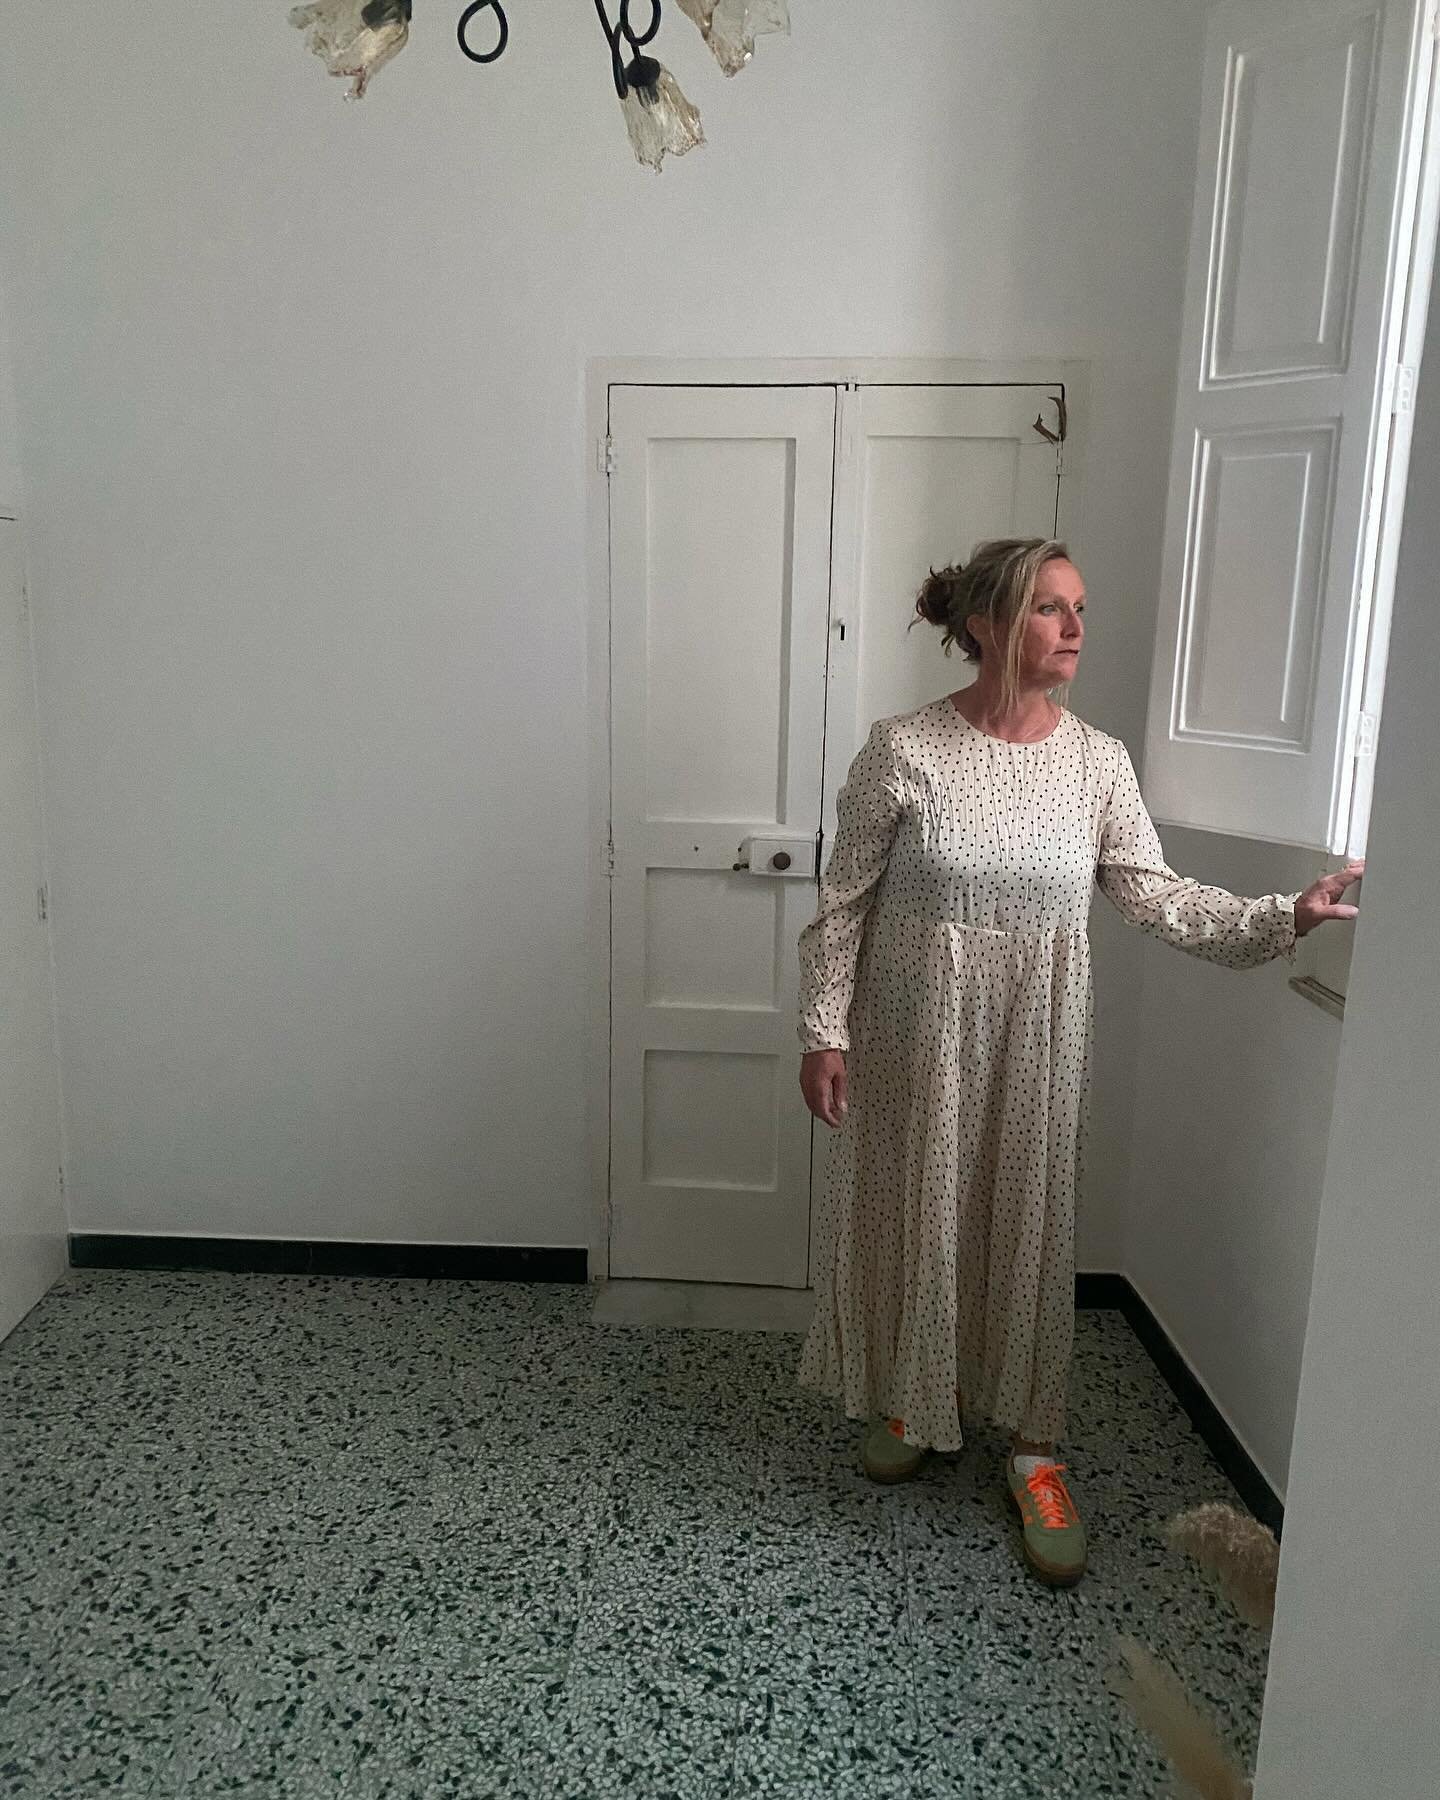 When on holiday. 

Home now so not channeling the ethereal quite so much. Also wondering if my shoes are actually Florence from the Magic Roundabout shoes as been my fashion USP for over 40 years. 

@palaisgentile #matino #italy #apotterslife #amanda